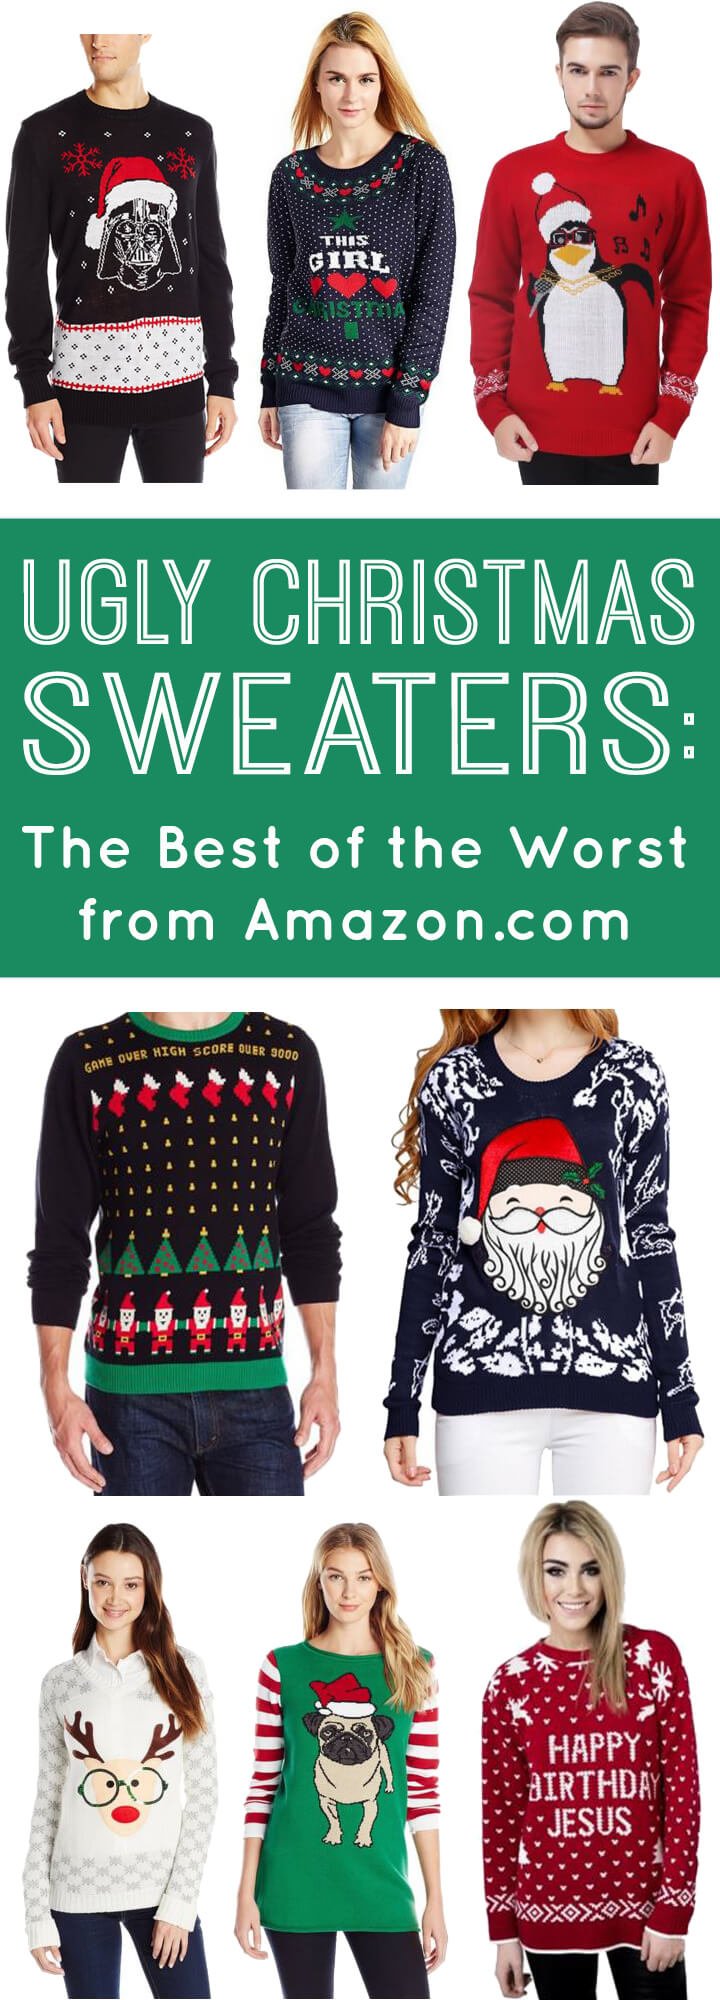 Ugly Christmas Sweaters: The Best of the Worst from Amazon.com